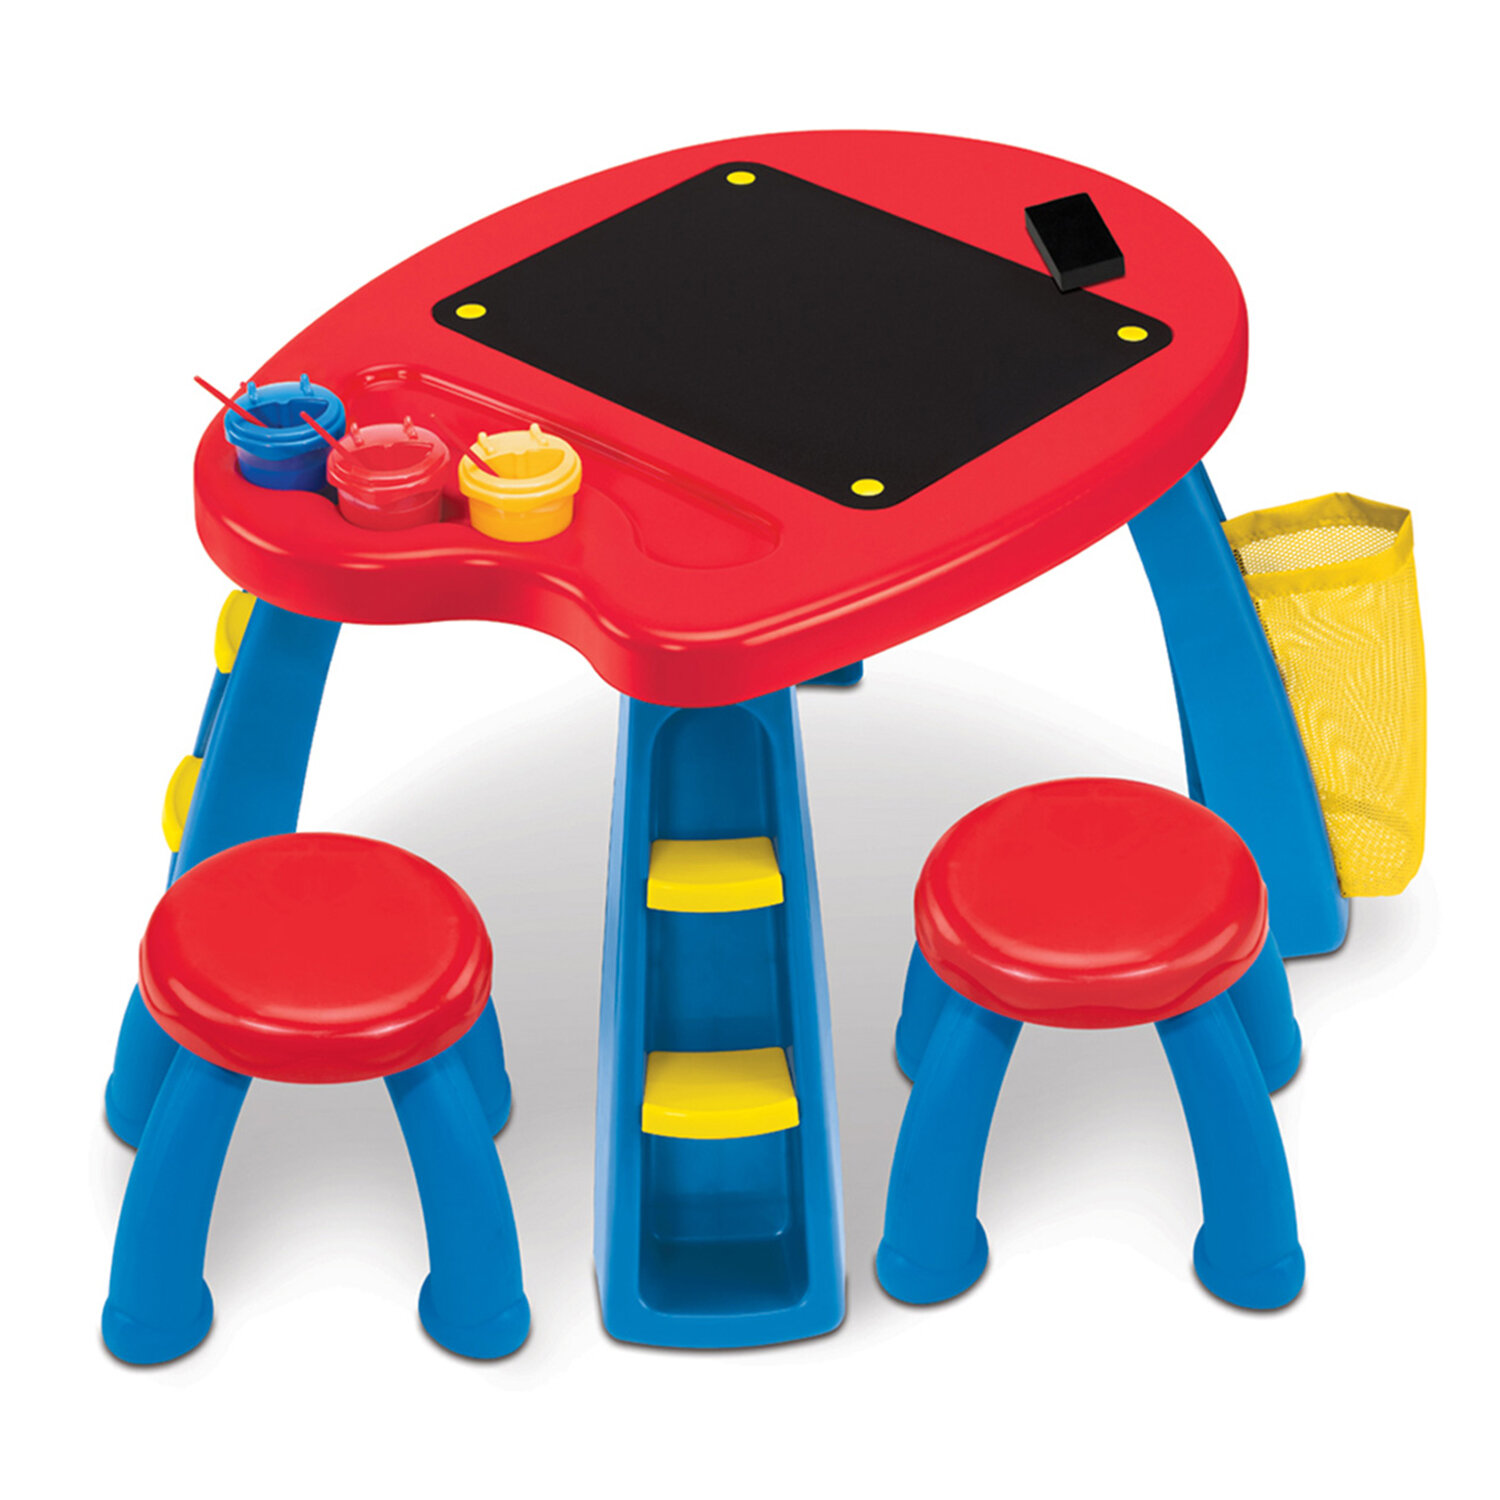 crayola table and chairs